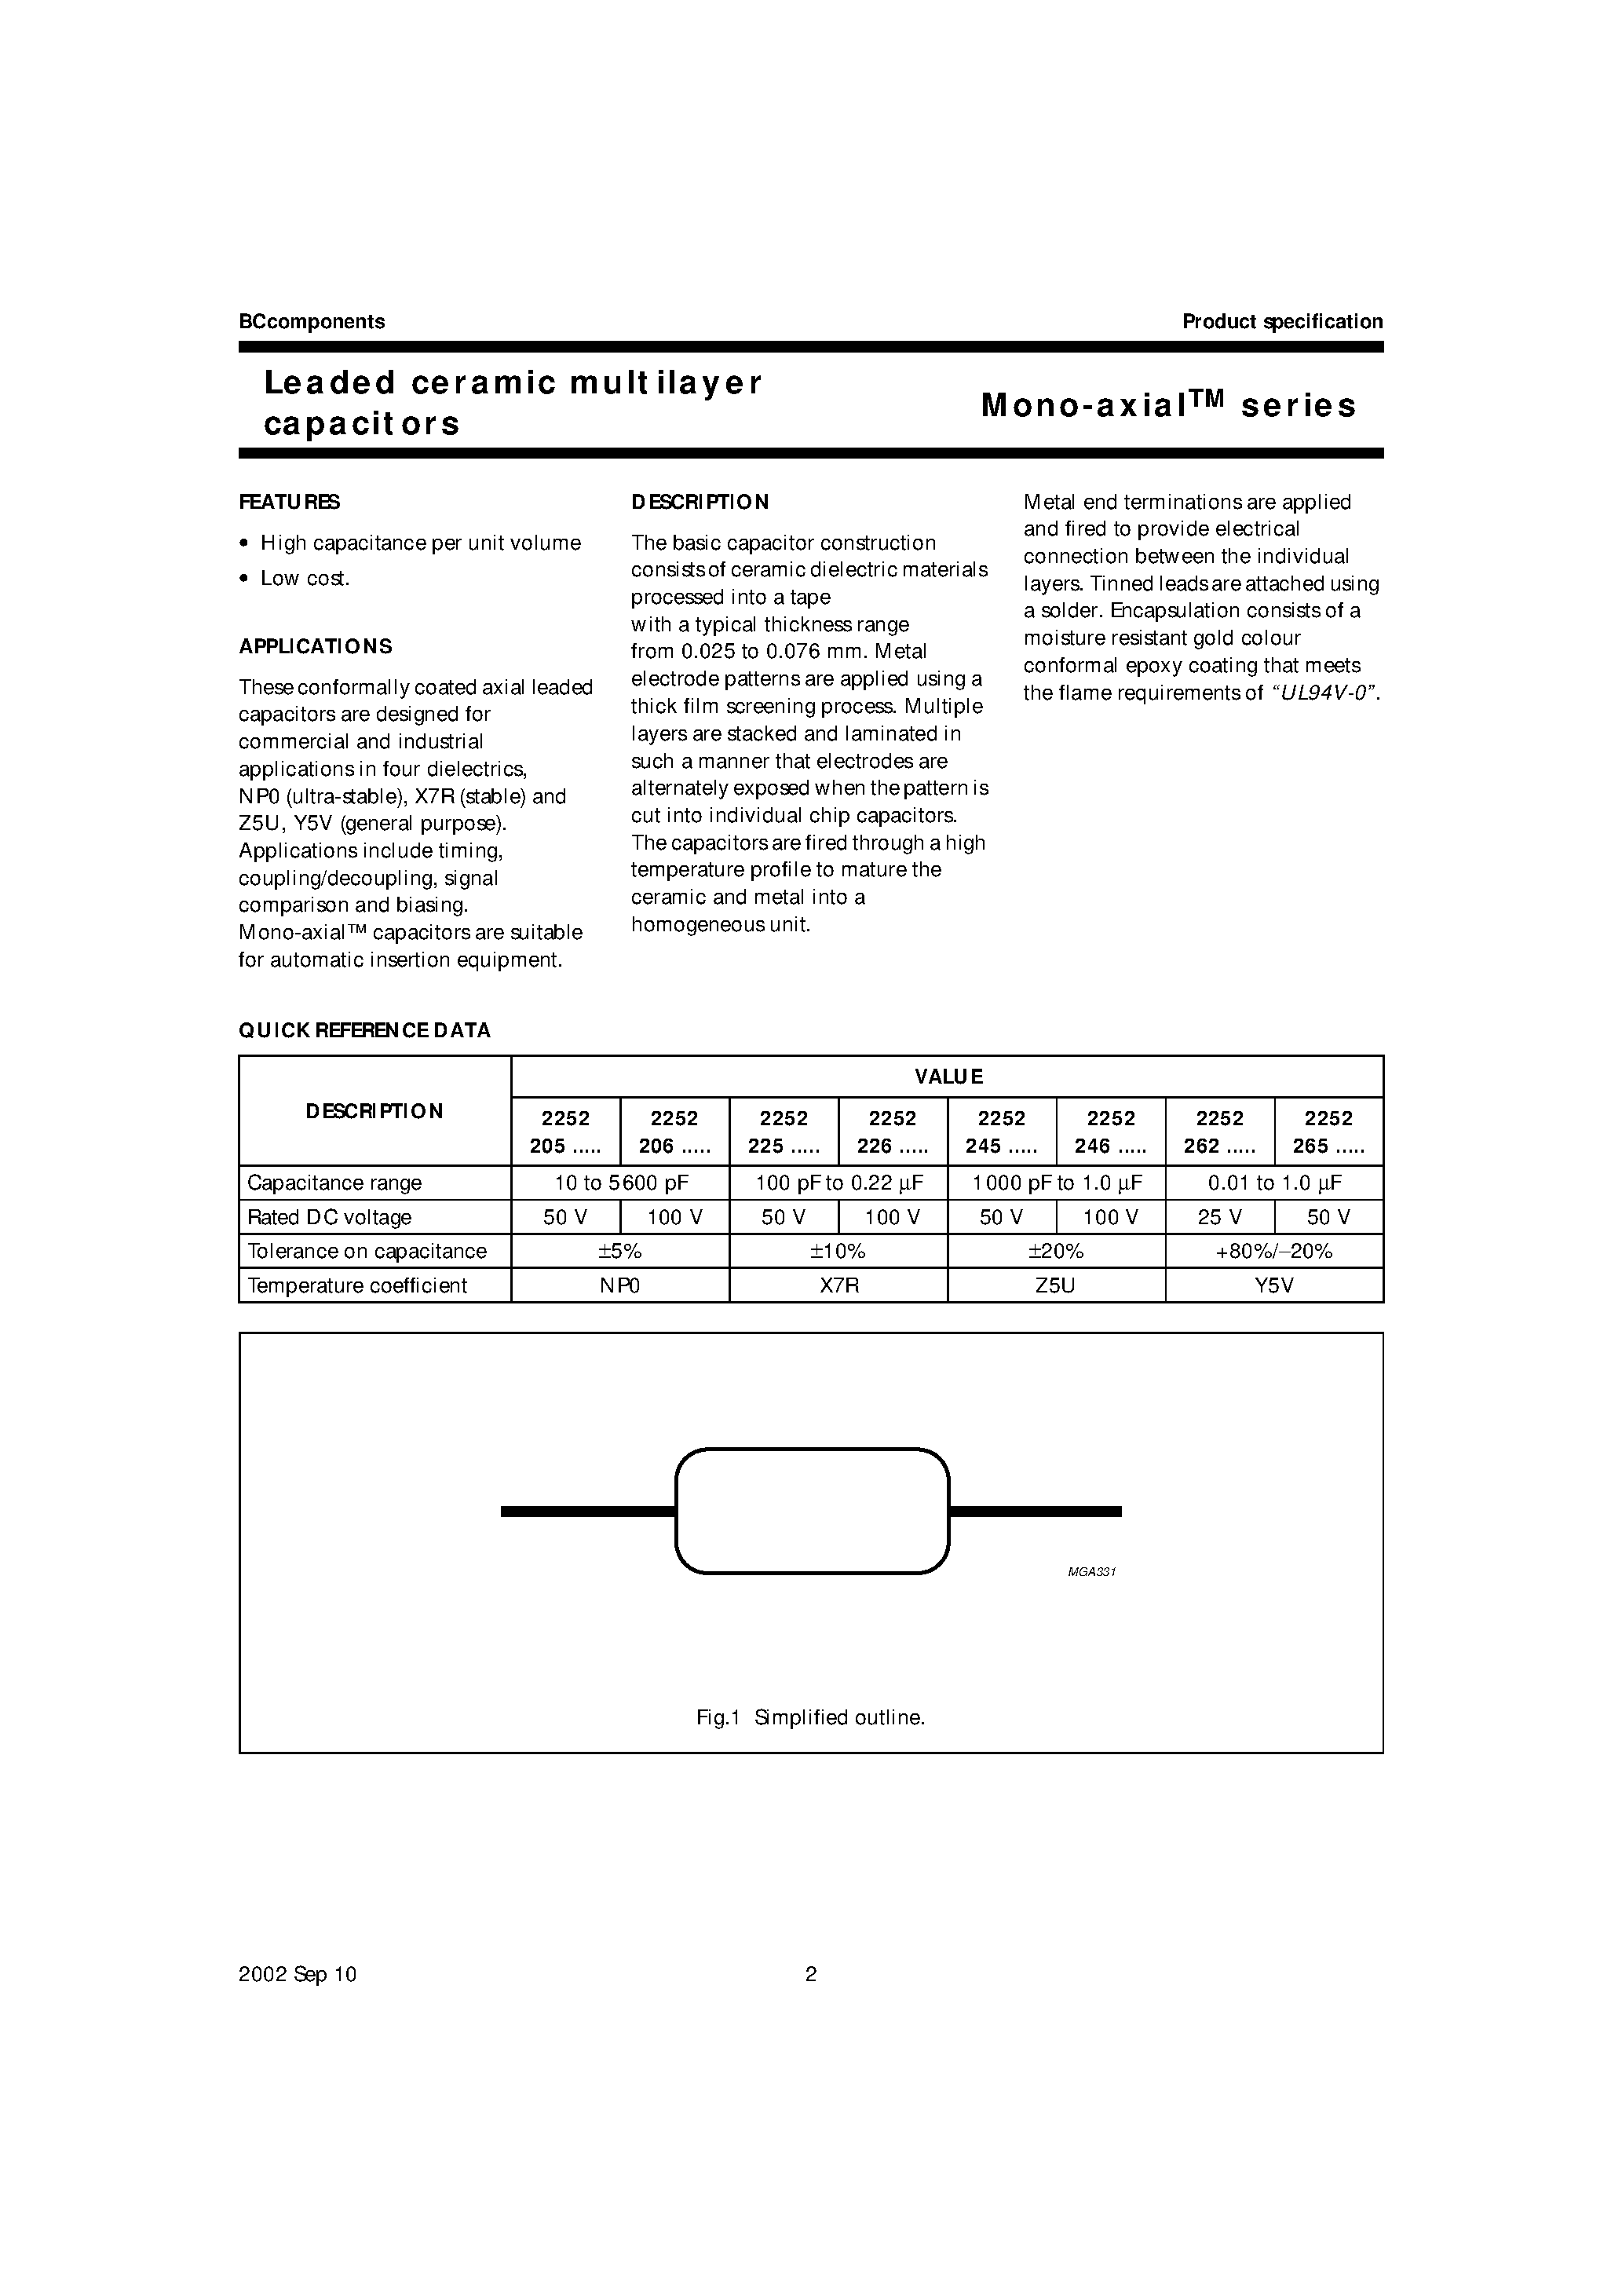 Datasheet A562J20C0GF5 - Mono-Axial Series / Leaded Ceramic Multilayer Capacitors page 2